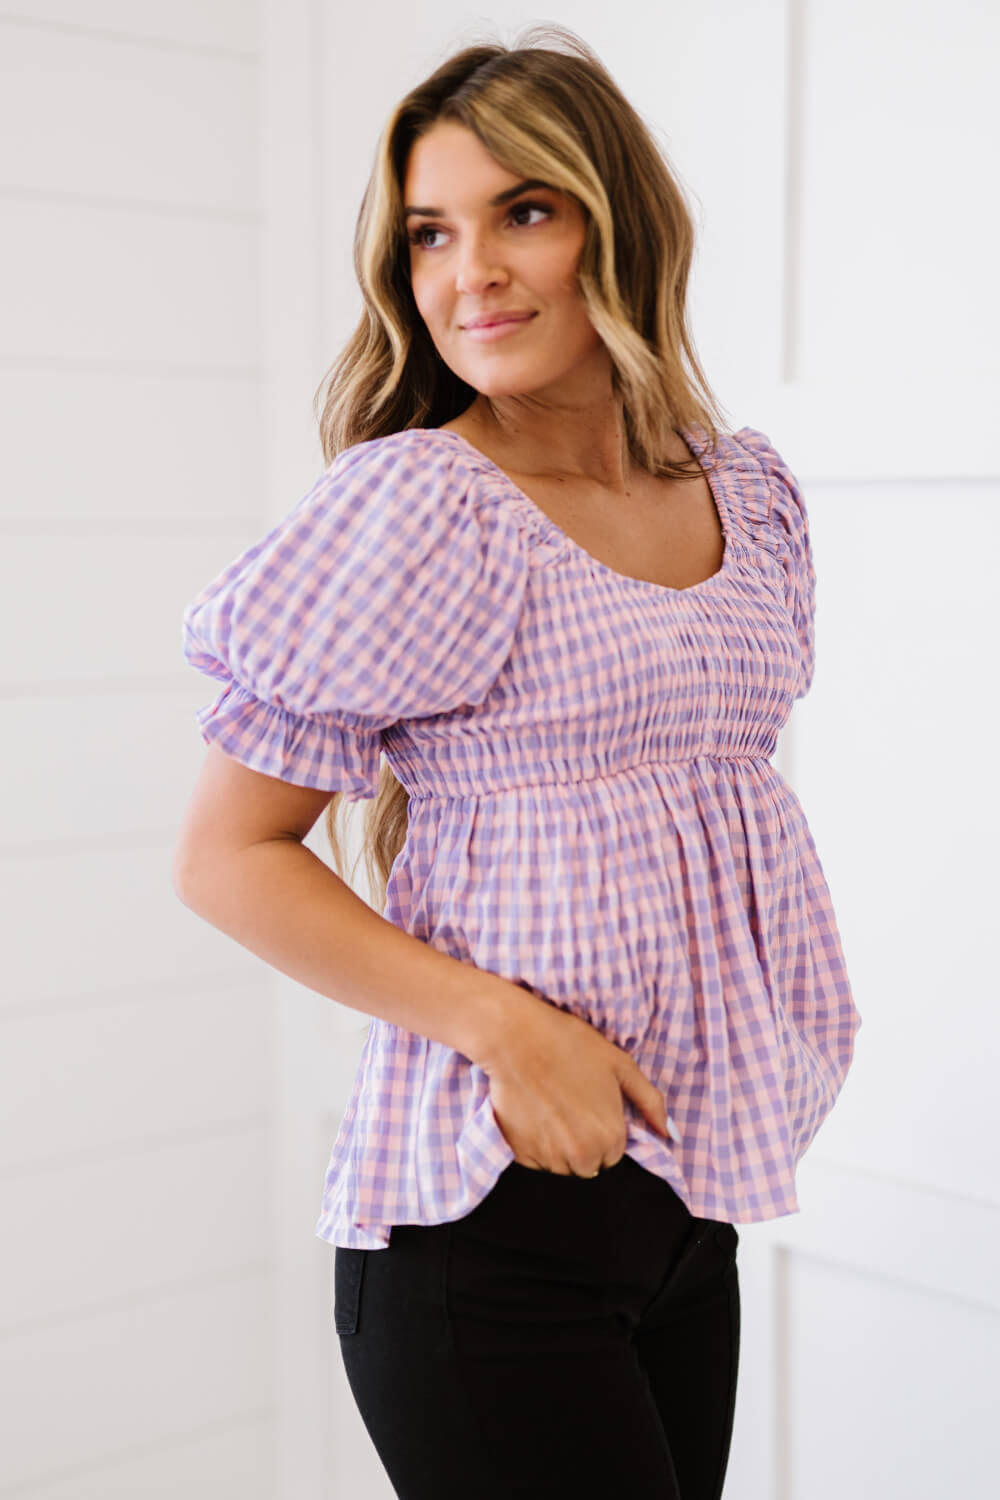 Youthful Days Full Size Run Gingham Smocked Babydoll Top